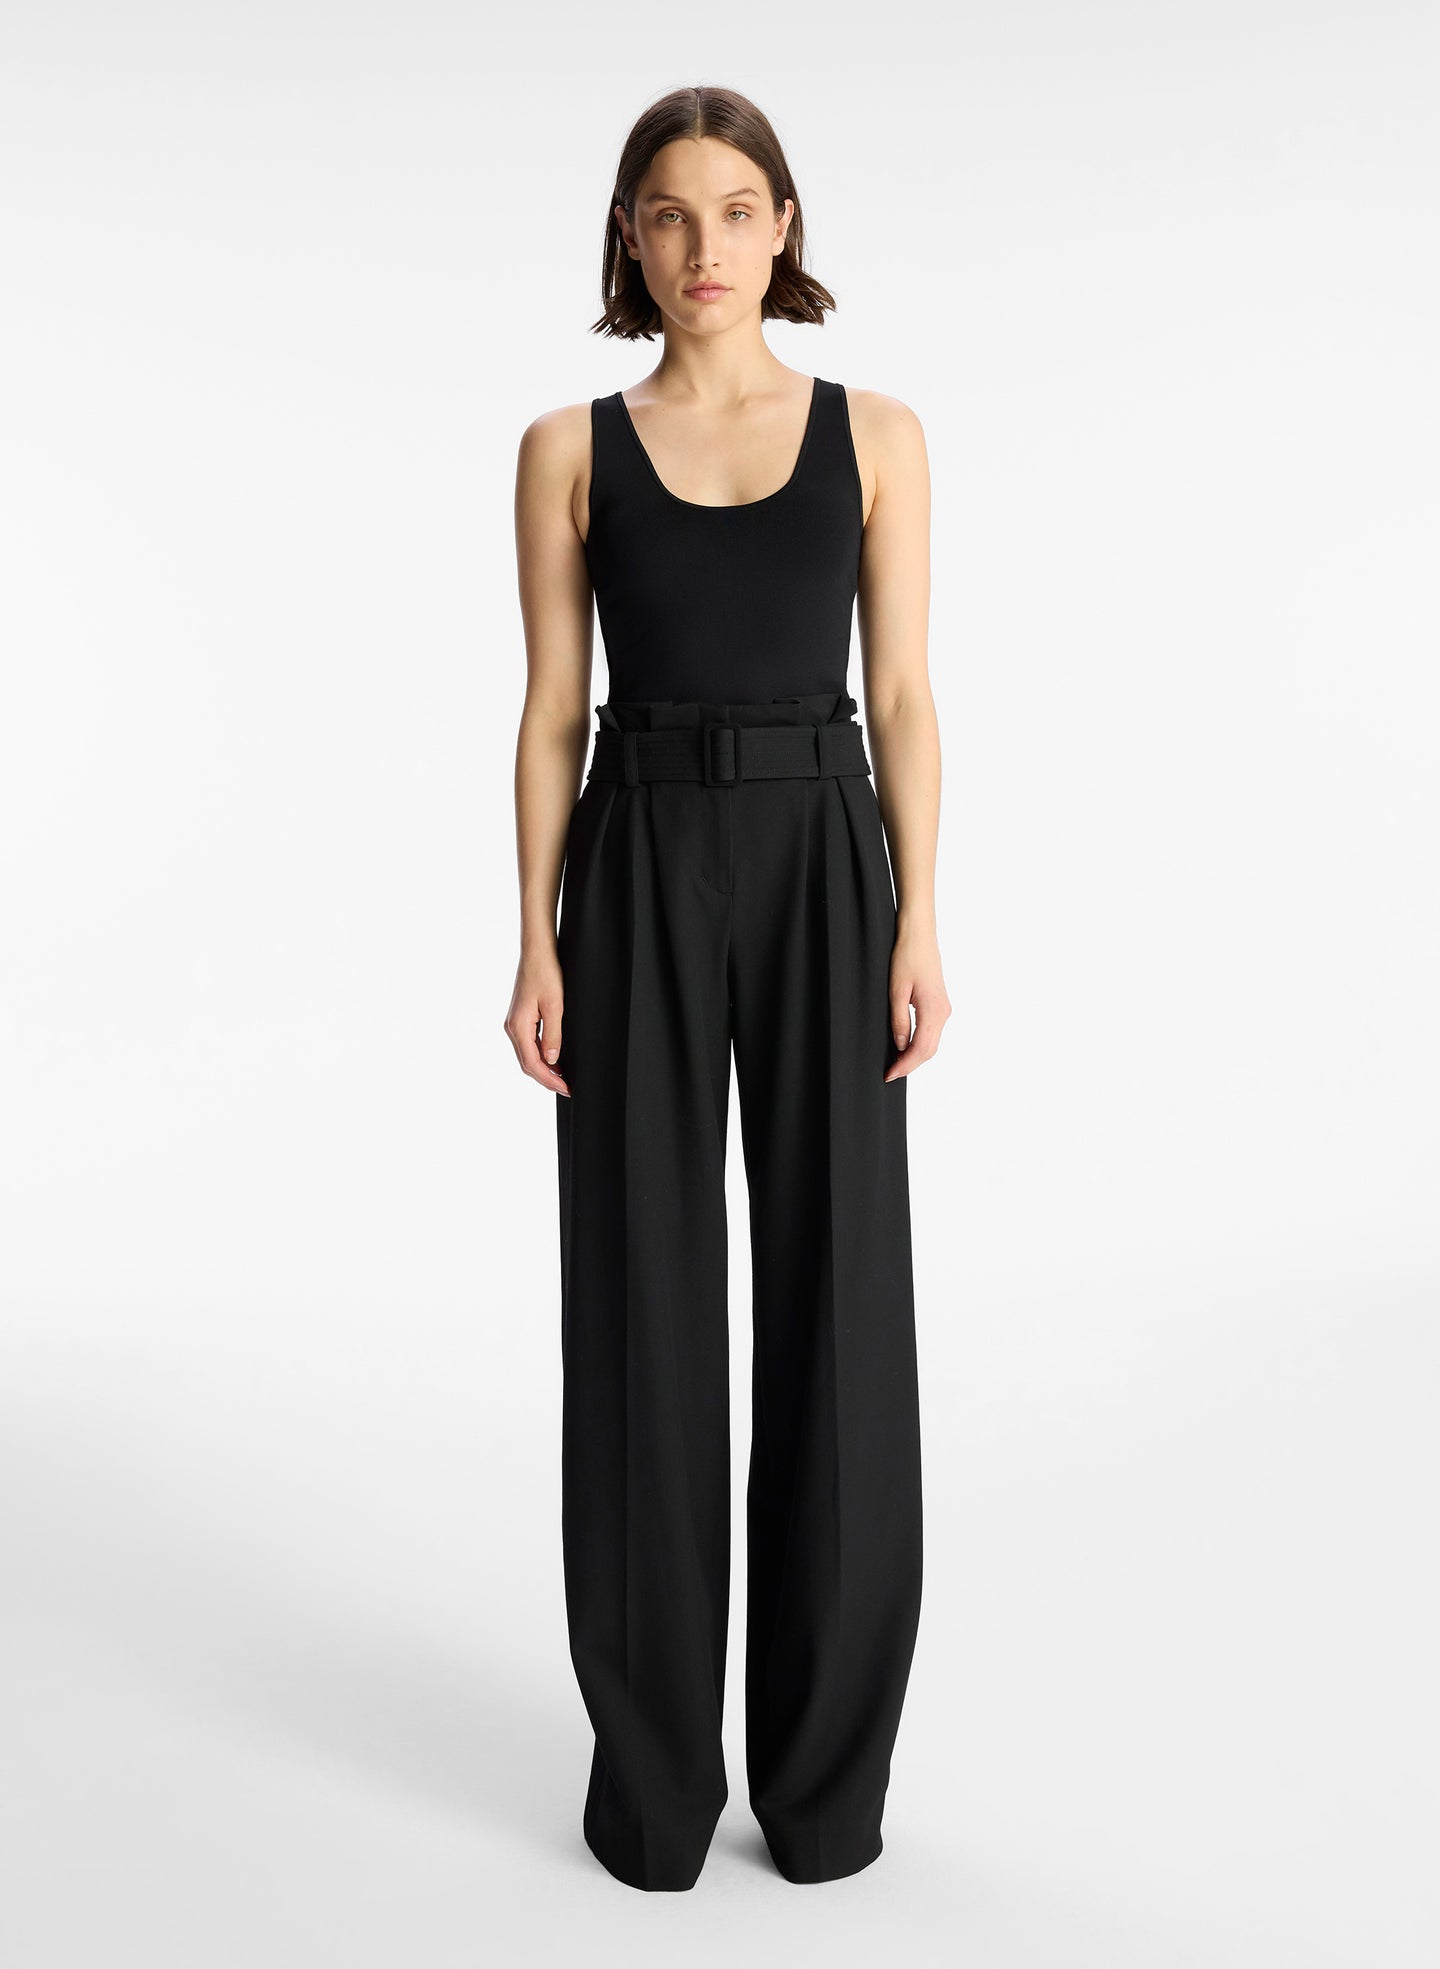 front view of woman wearing black tank top and black wide leg pants